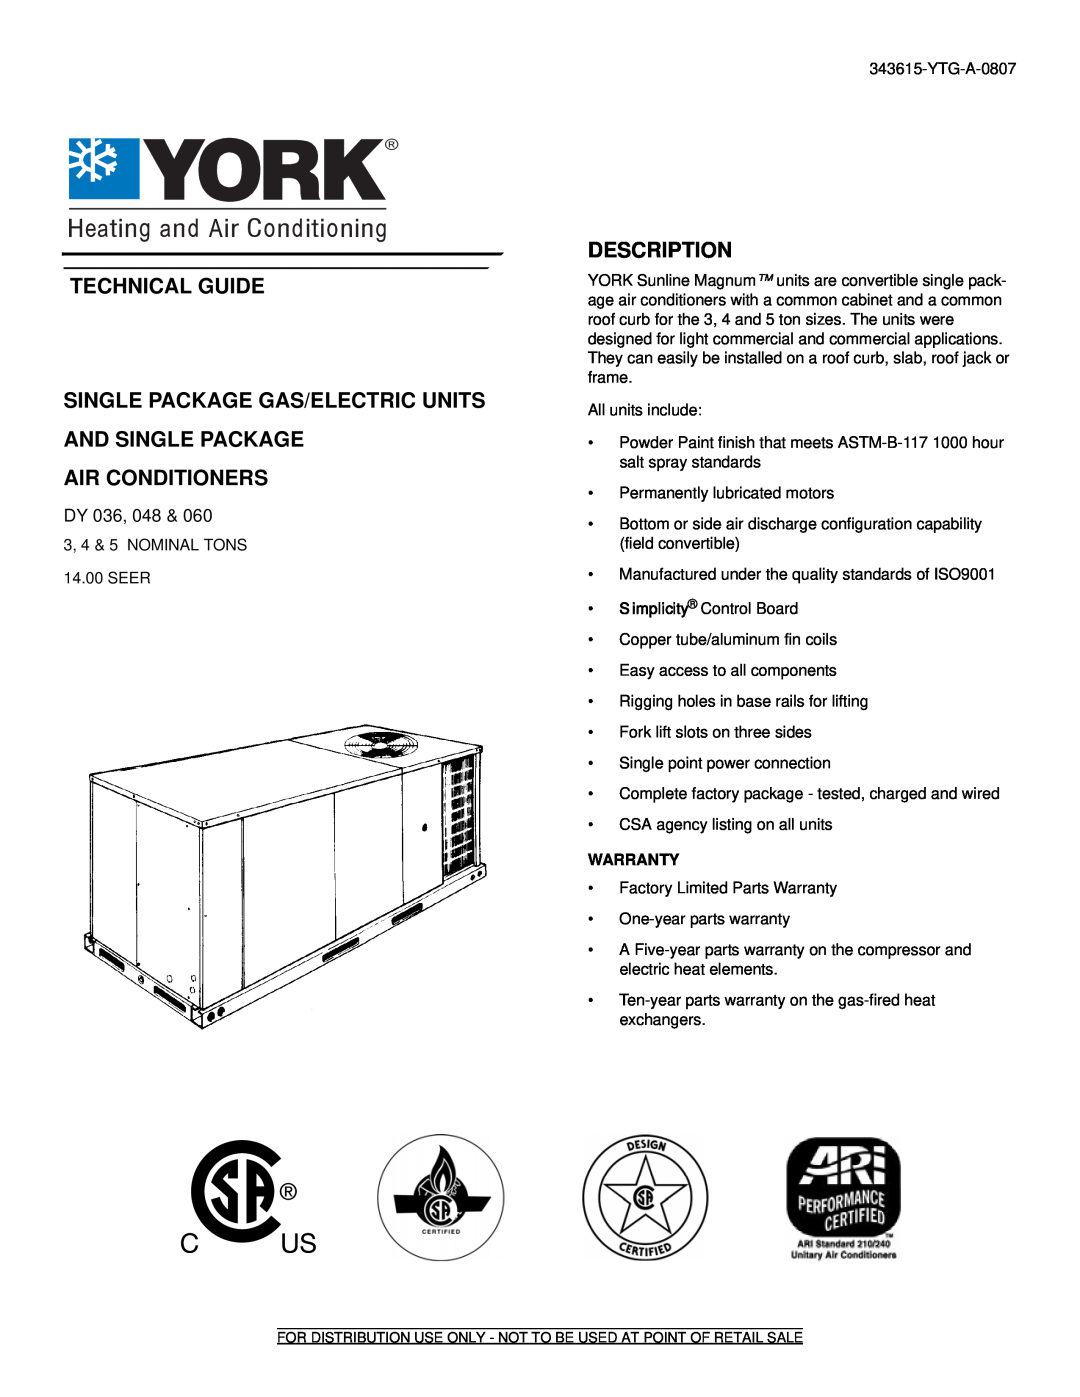 York DY 036 warranty Technical Guide, Air Conditioners, Description, Dy 